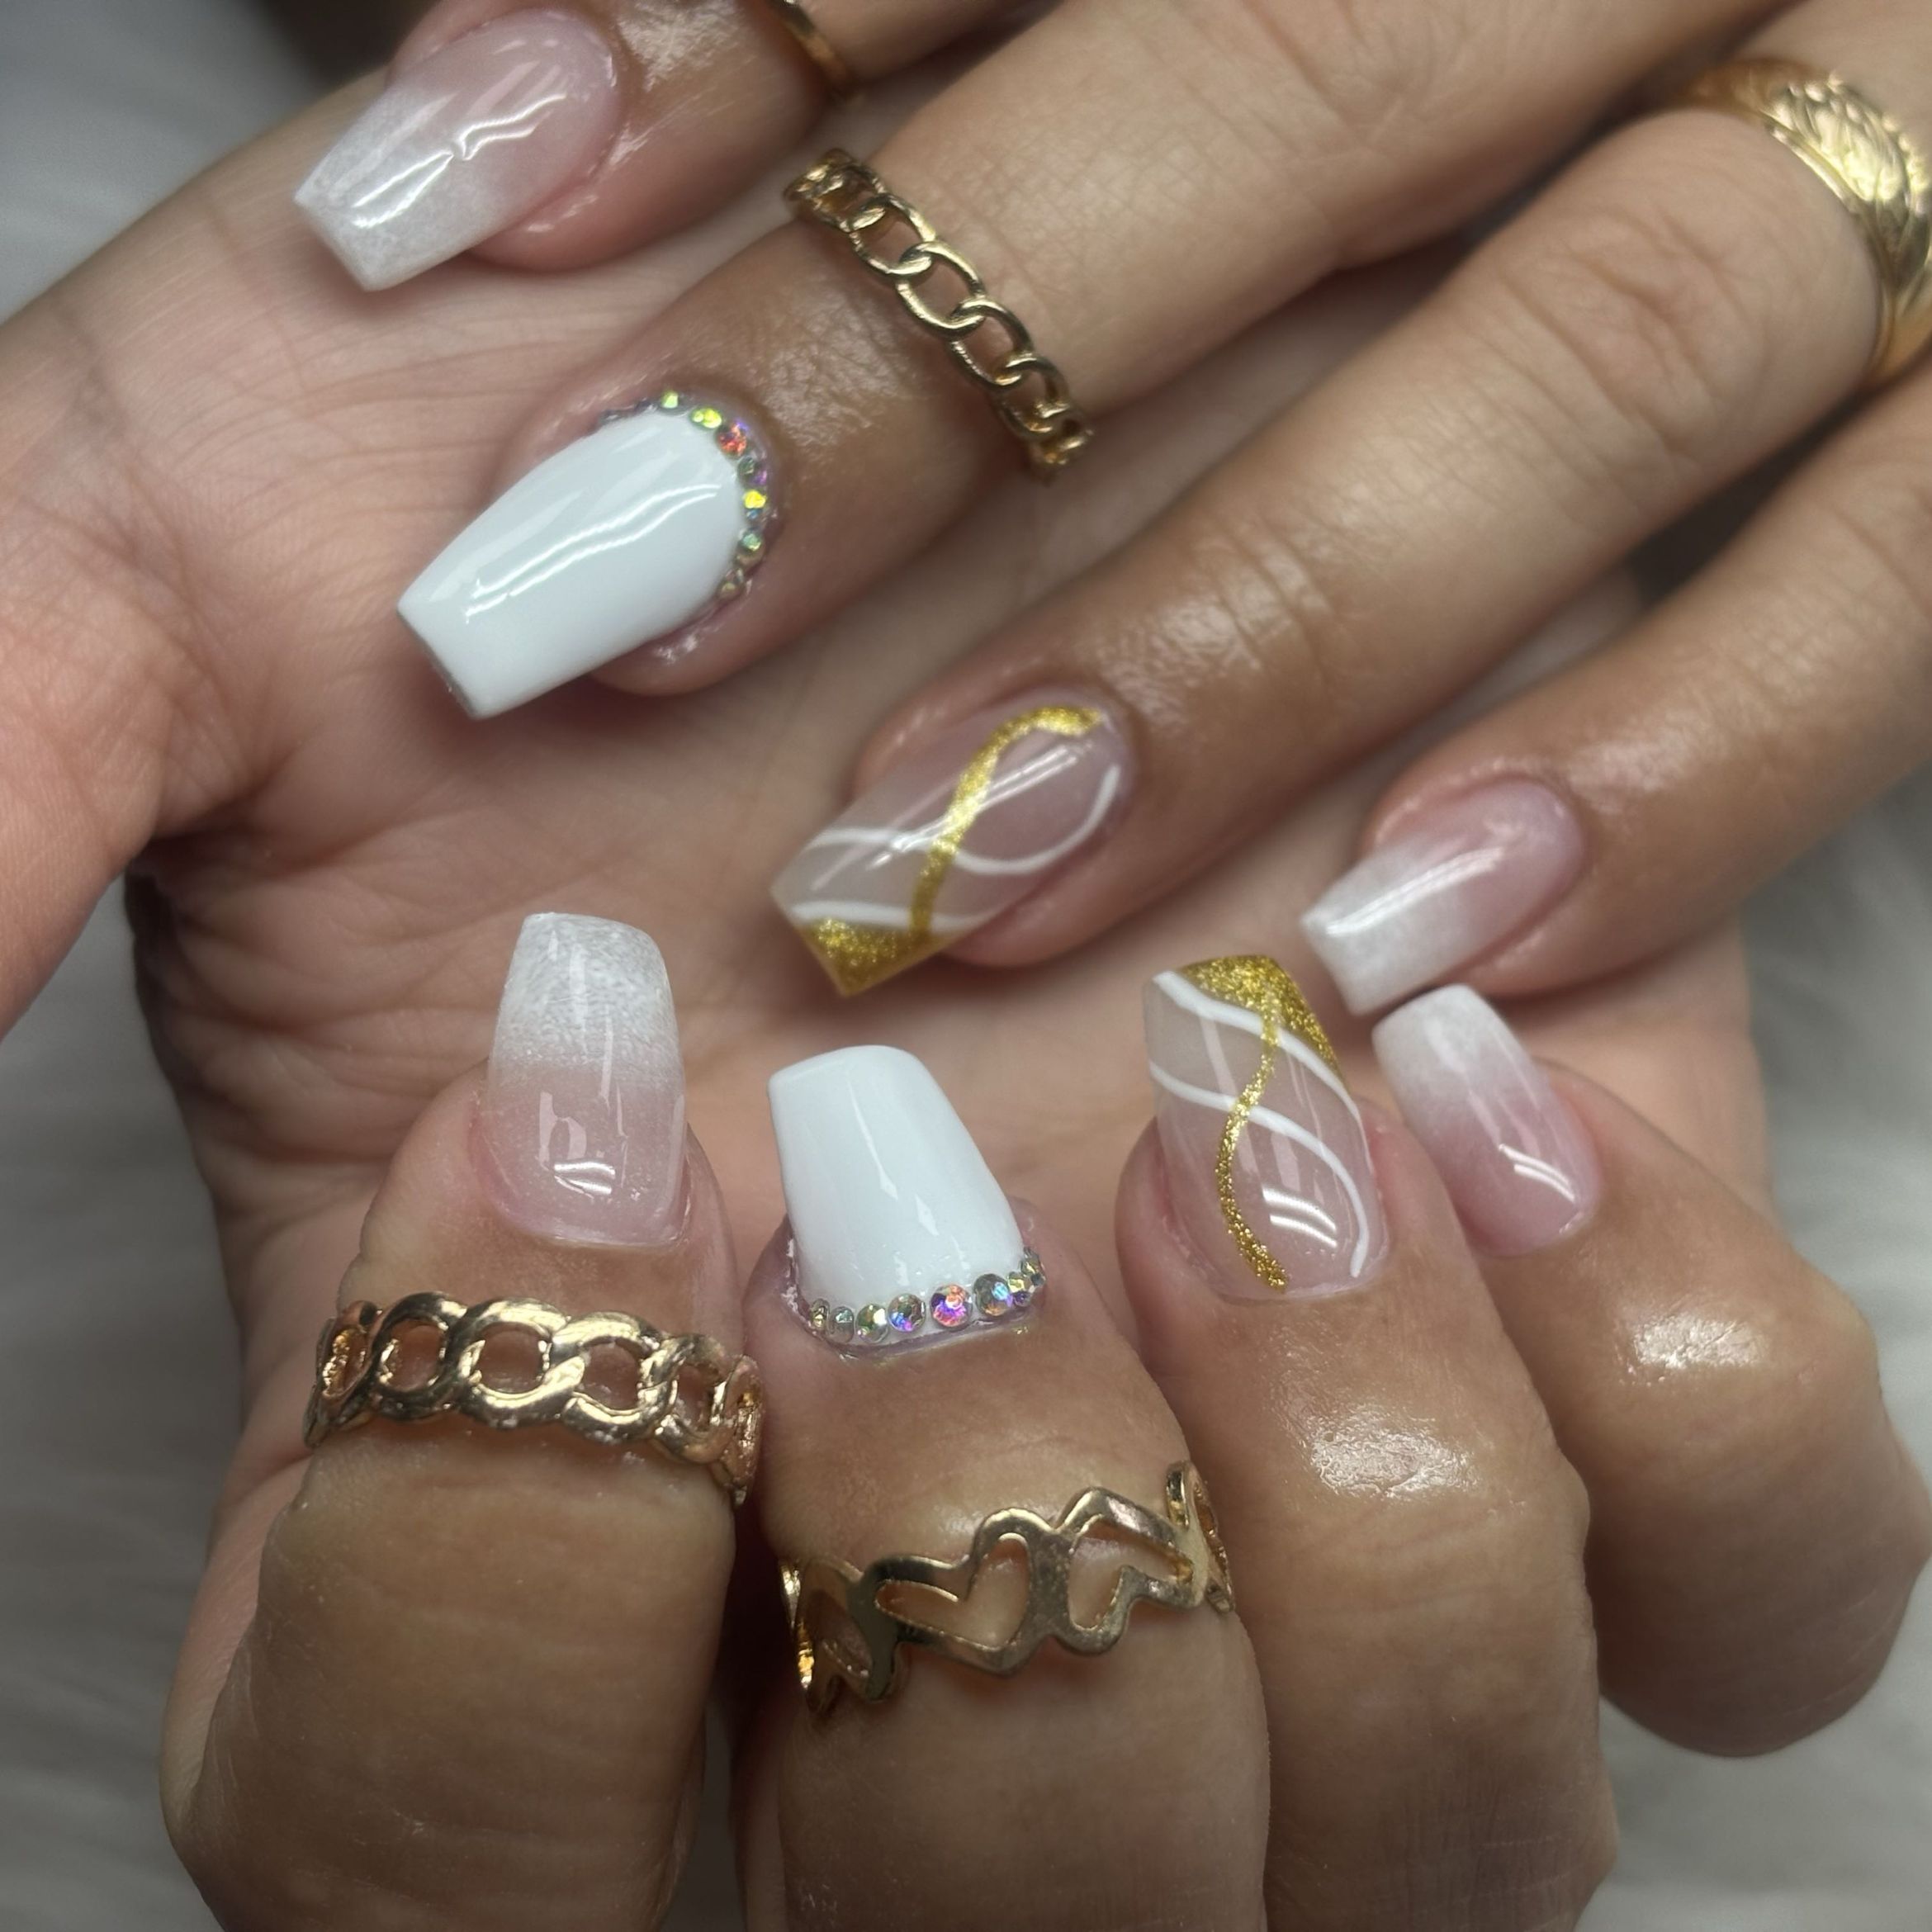 Gina Nails, 6750 SW 22nd St, Miami, 33155